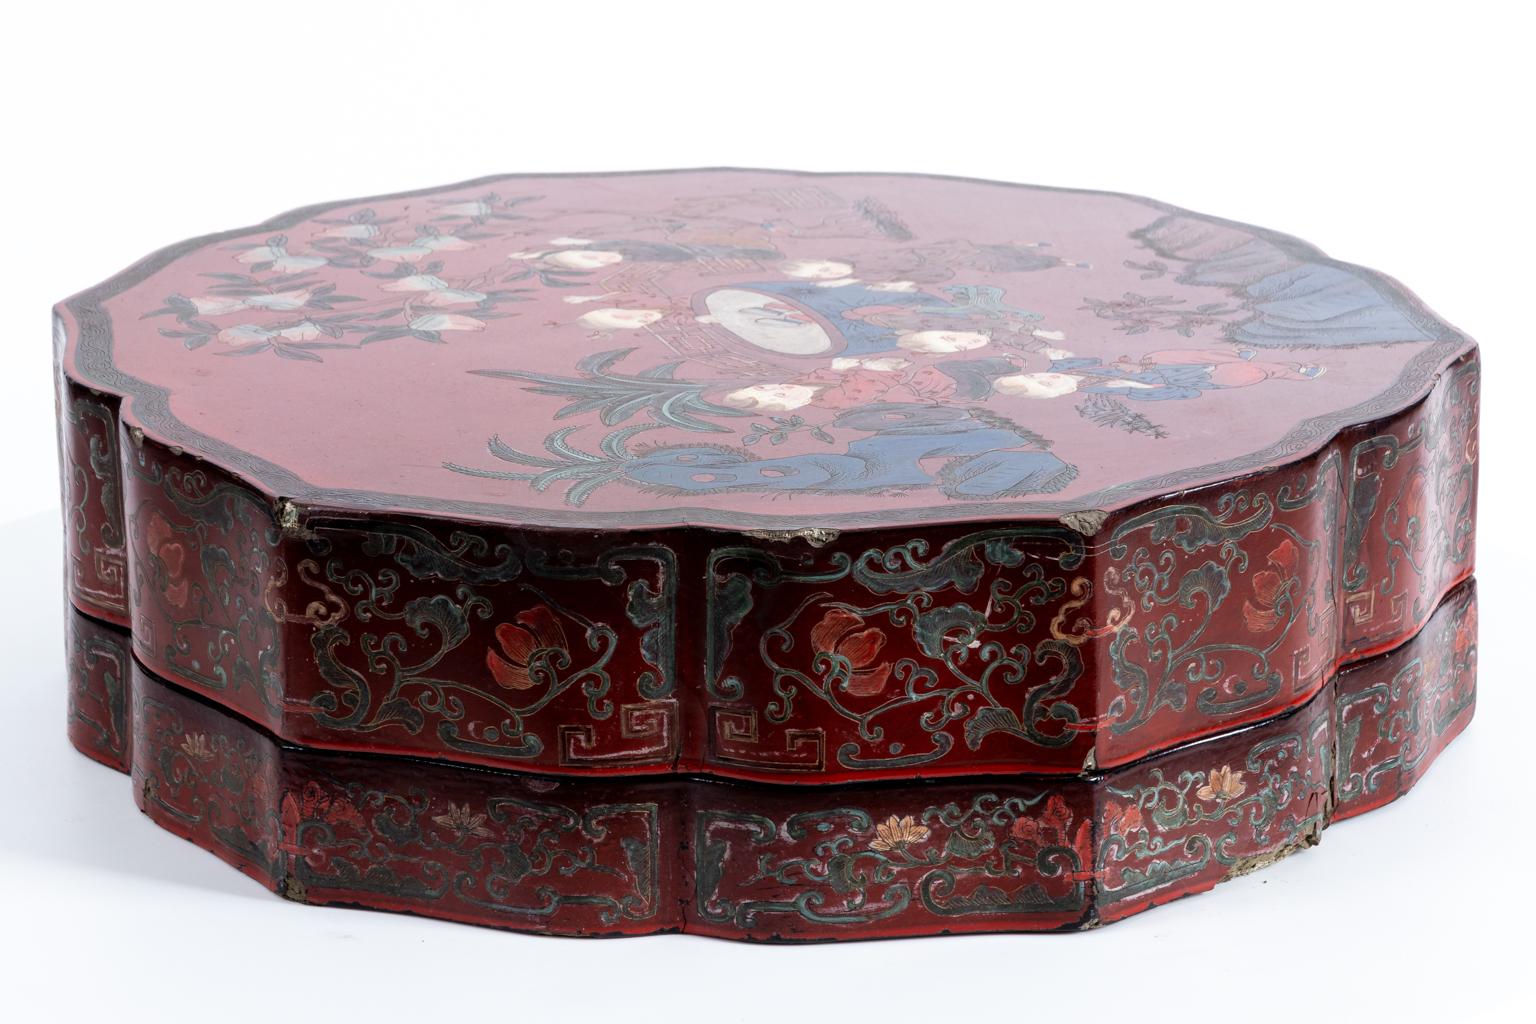 Painted Chinese Lacquered Box